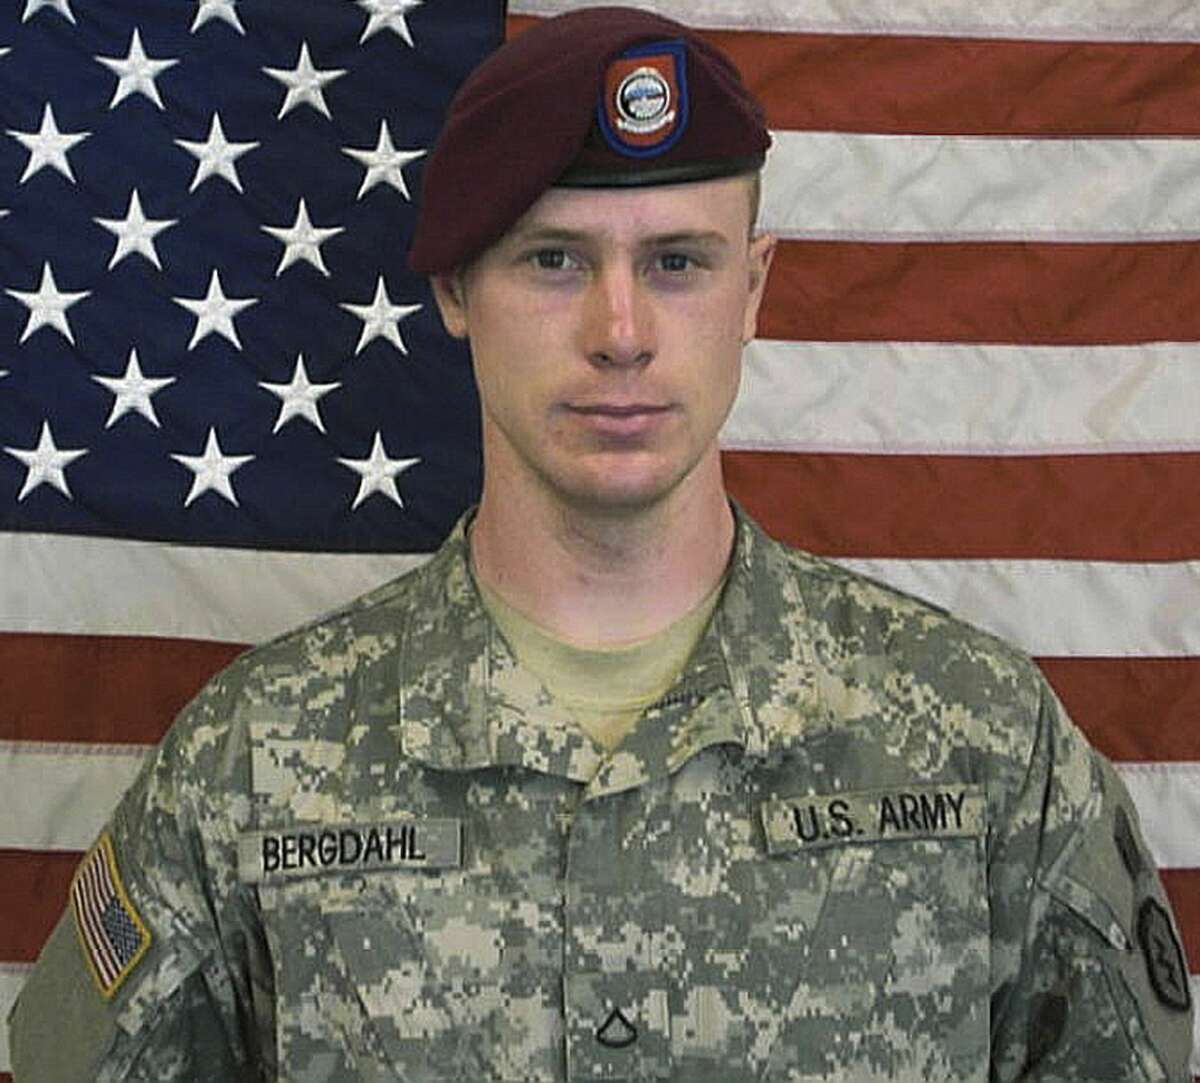 FILE - This undated file image provided by the U.S. Army shows Sgt. Bowe Bergdahl. A U.S. official says Bergdahl, who abandoned his post in Afghanistan and was held by the Taliban for five years, will be court martialed on charges of desertion and avoiding military service. (AP Photo/U.S. Army, file)